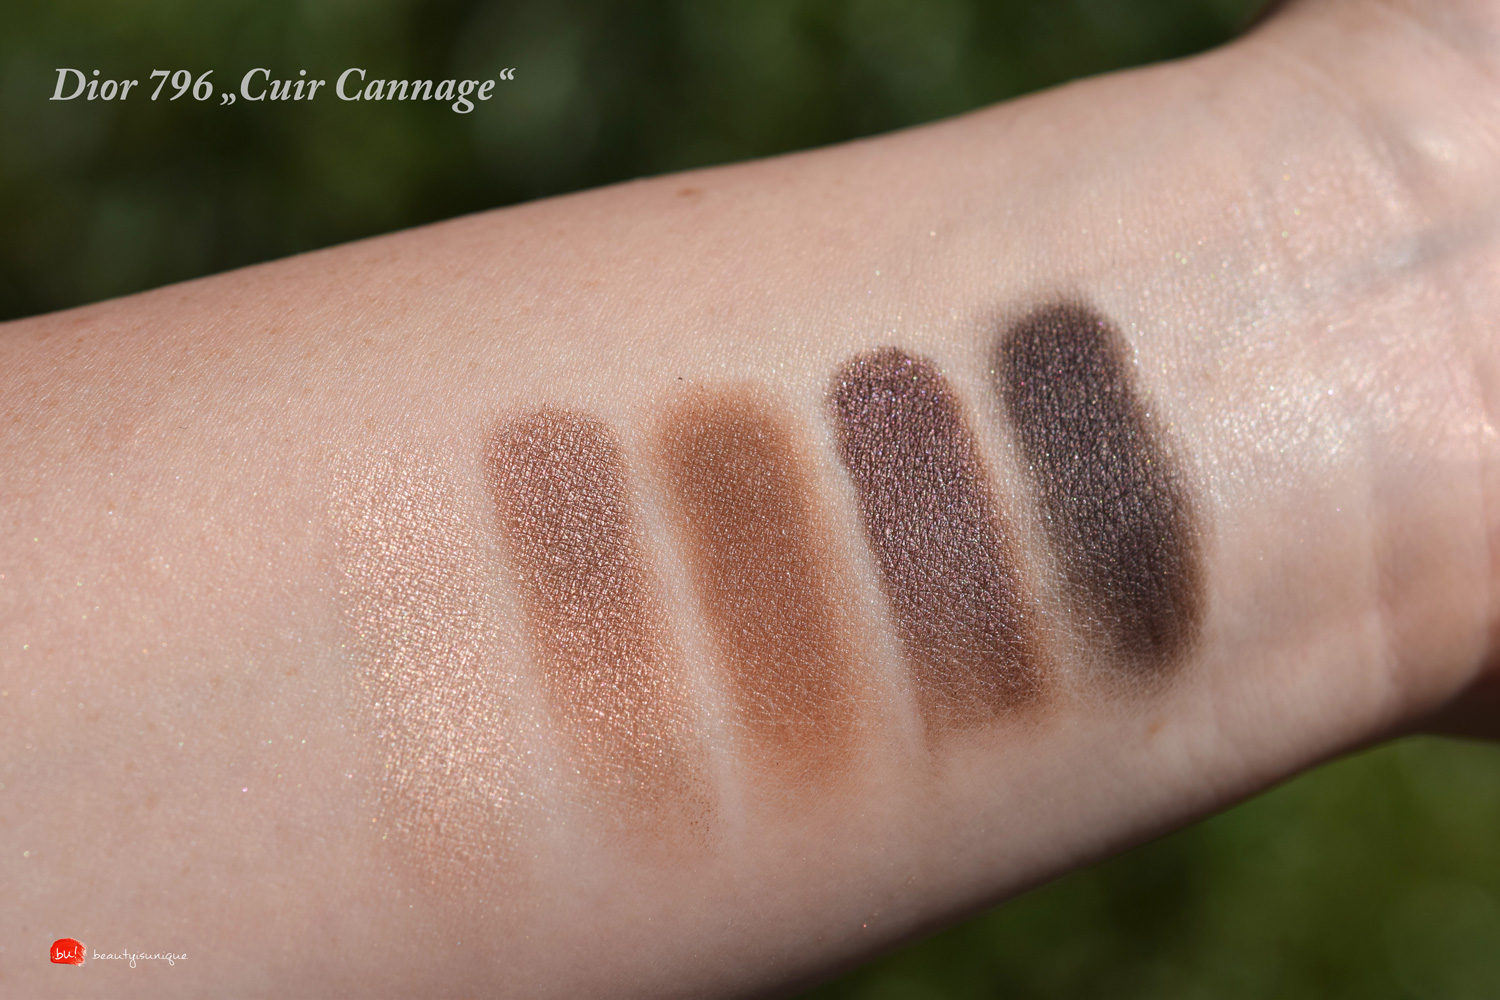 Dior-cuir-cannage-796-swatches